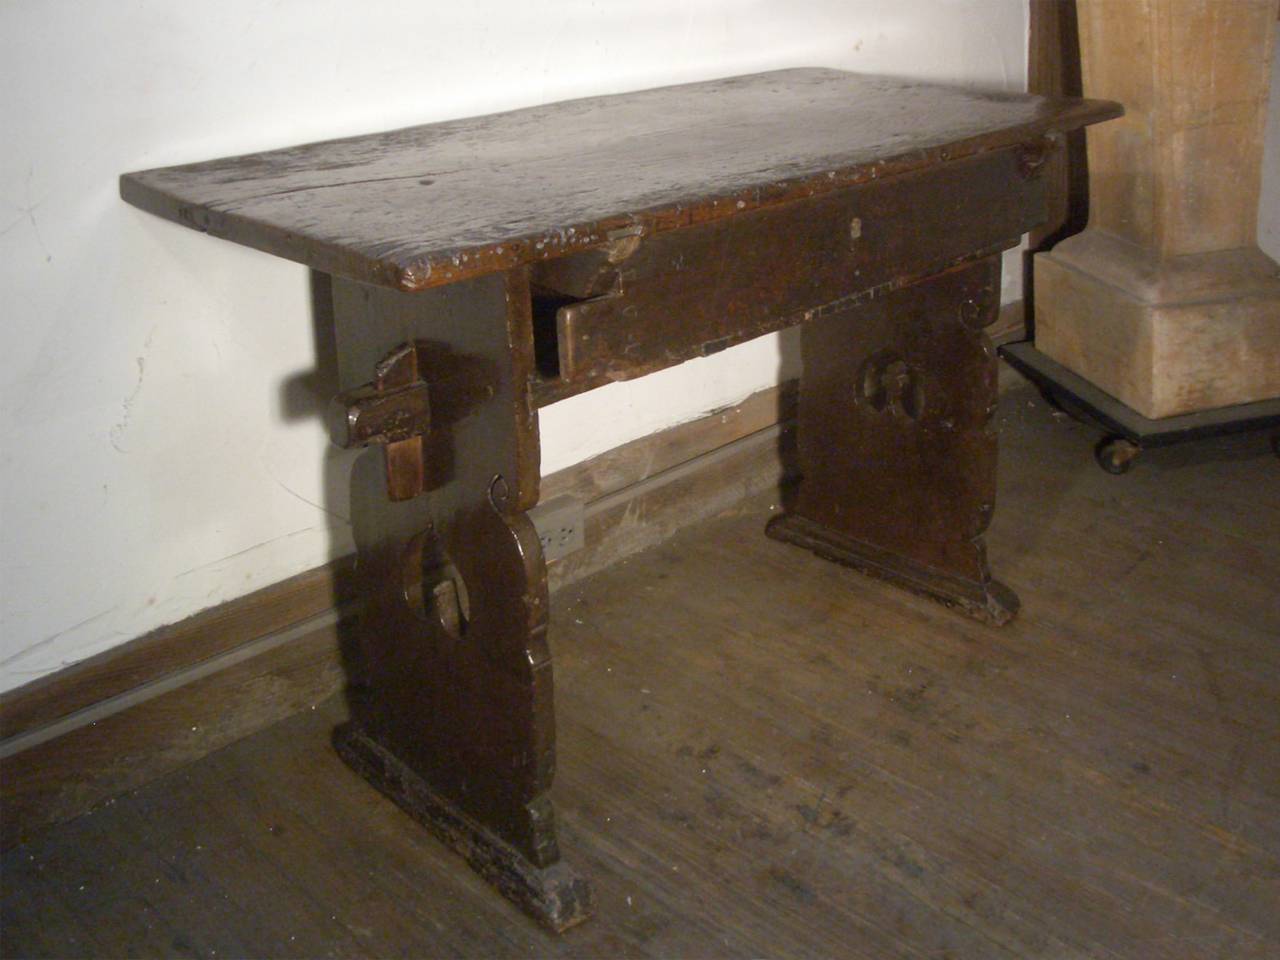 Very charming alpine table of late Gothic design, the one plank top supported by sides ending in shoe feet with simple decoration, one drawer above a connecting stretcher.
